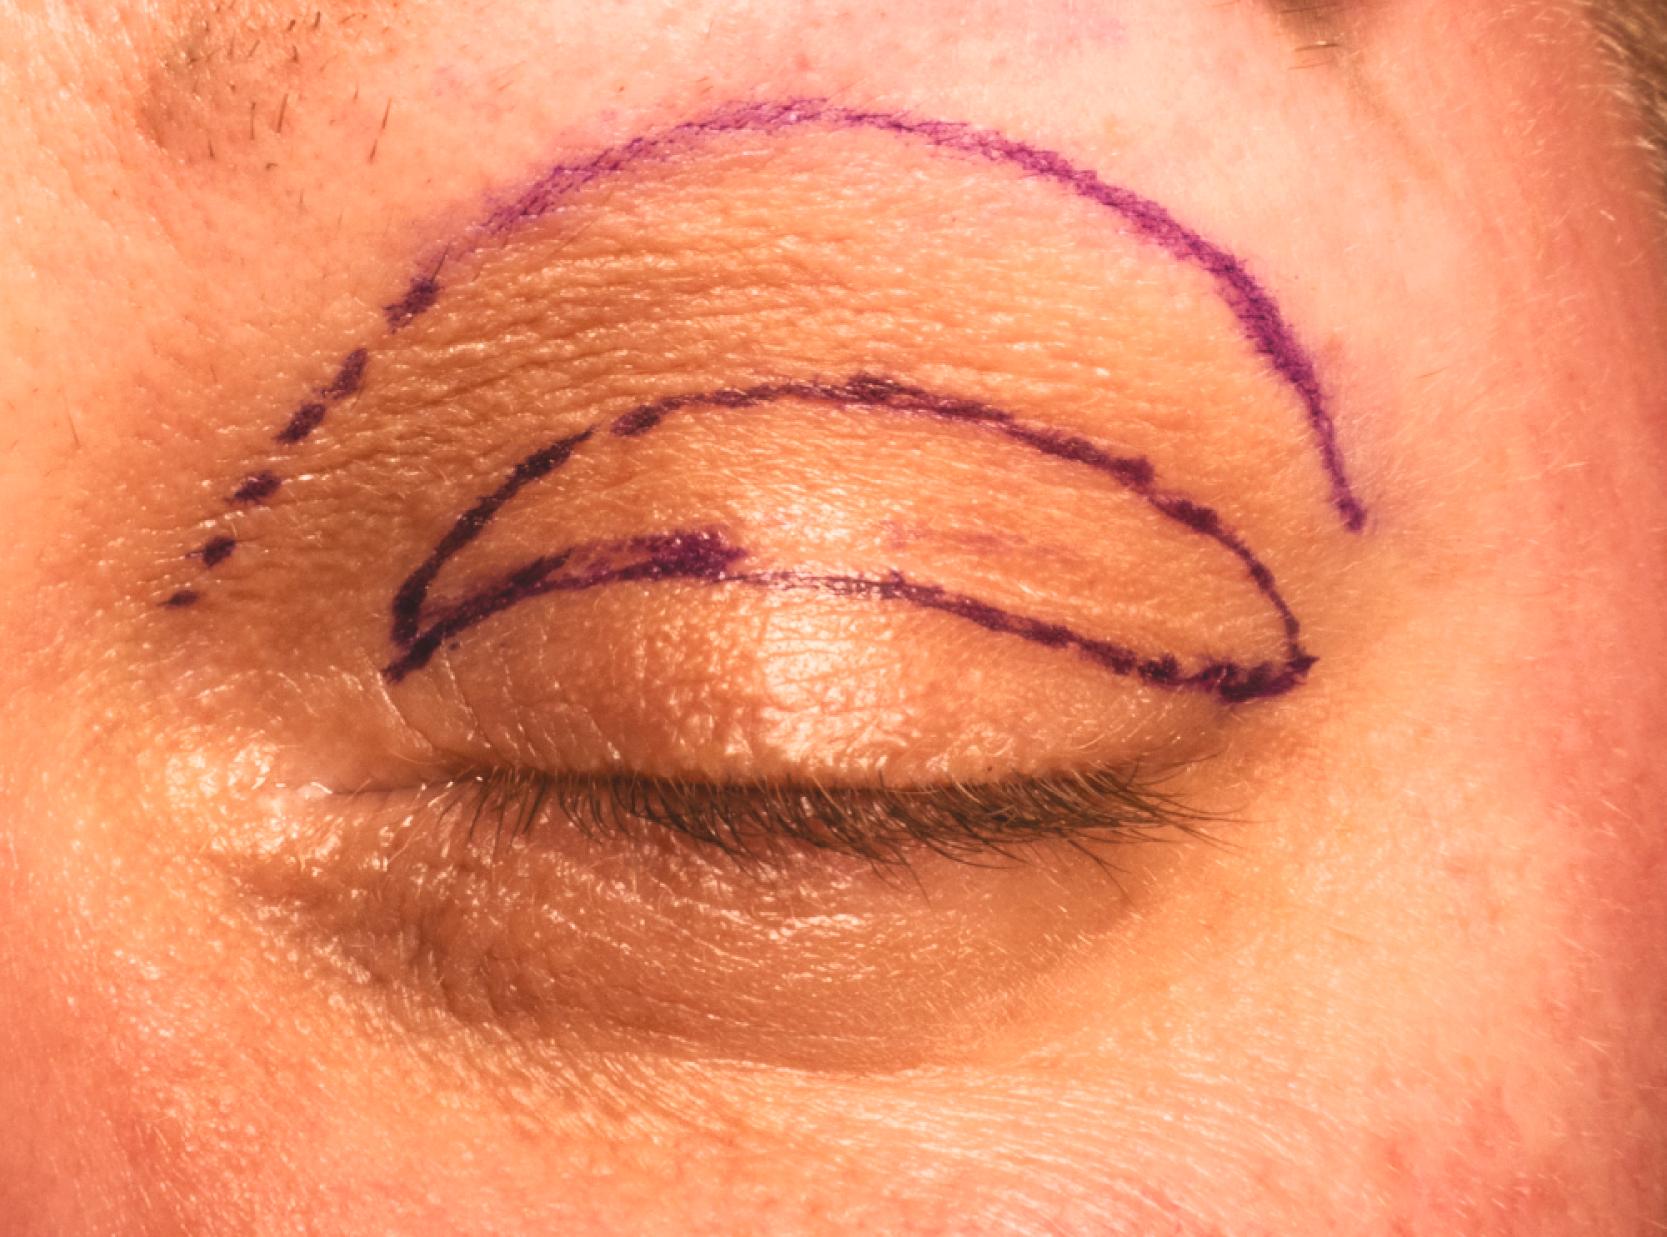 Figure 6.10, Eyelid skin pigmentation. The eyelid skin, when compared with the eyebrow and cheek, is thinner, more textured, and more pigmented. Upper line denotes the start of the eyebrow skin. Ellipse shows the planned blepharoplasty incision leaving an adequate amount of eyelid skin for normal blinking. You should also be aware of the difference in the amount and position of the underlying fat pads. Positioning the tissues surrounding the eyelid using a cheek lift or browplasty helps make the transition from the eyelids to the cheek and brow more graceful, an important sign of youth.